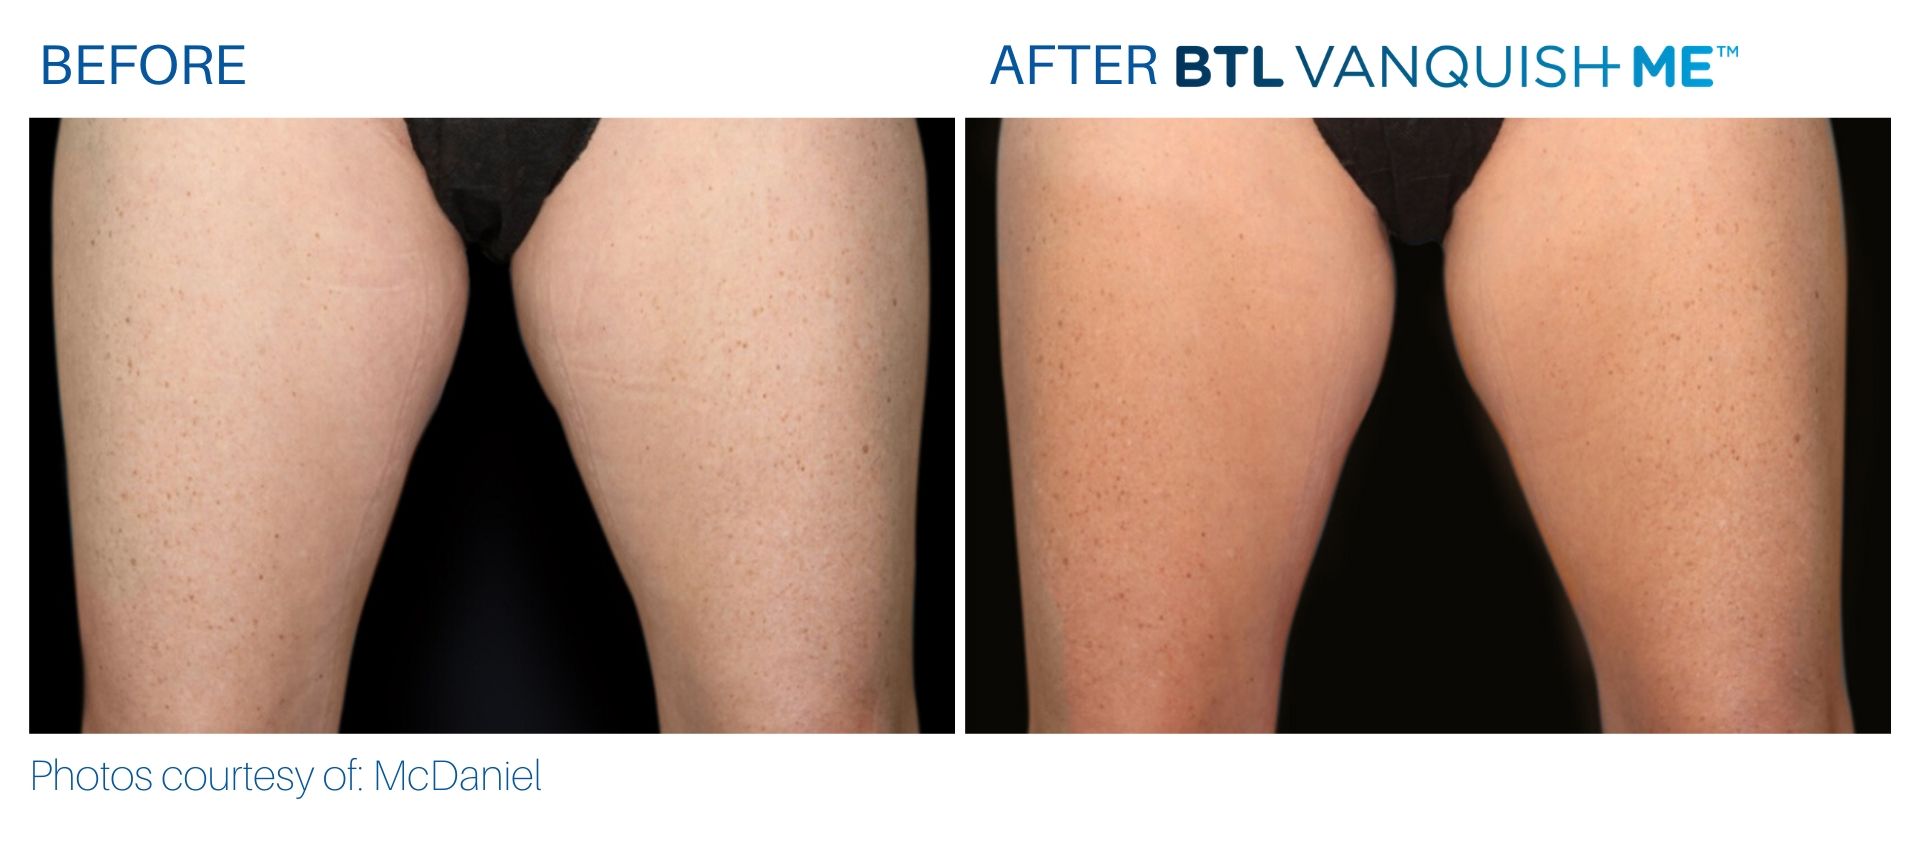 Before & After Vanquish Me Fat Reduction treatment results | Avail Aesthetics in Cary, Raleigh & Wake Forest, NC